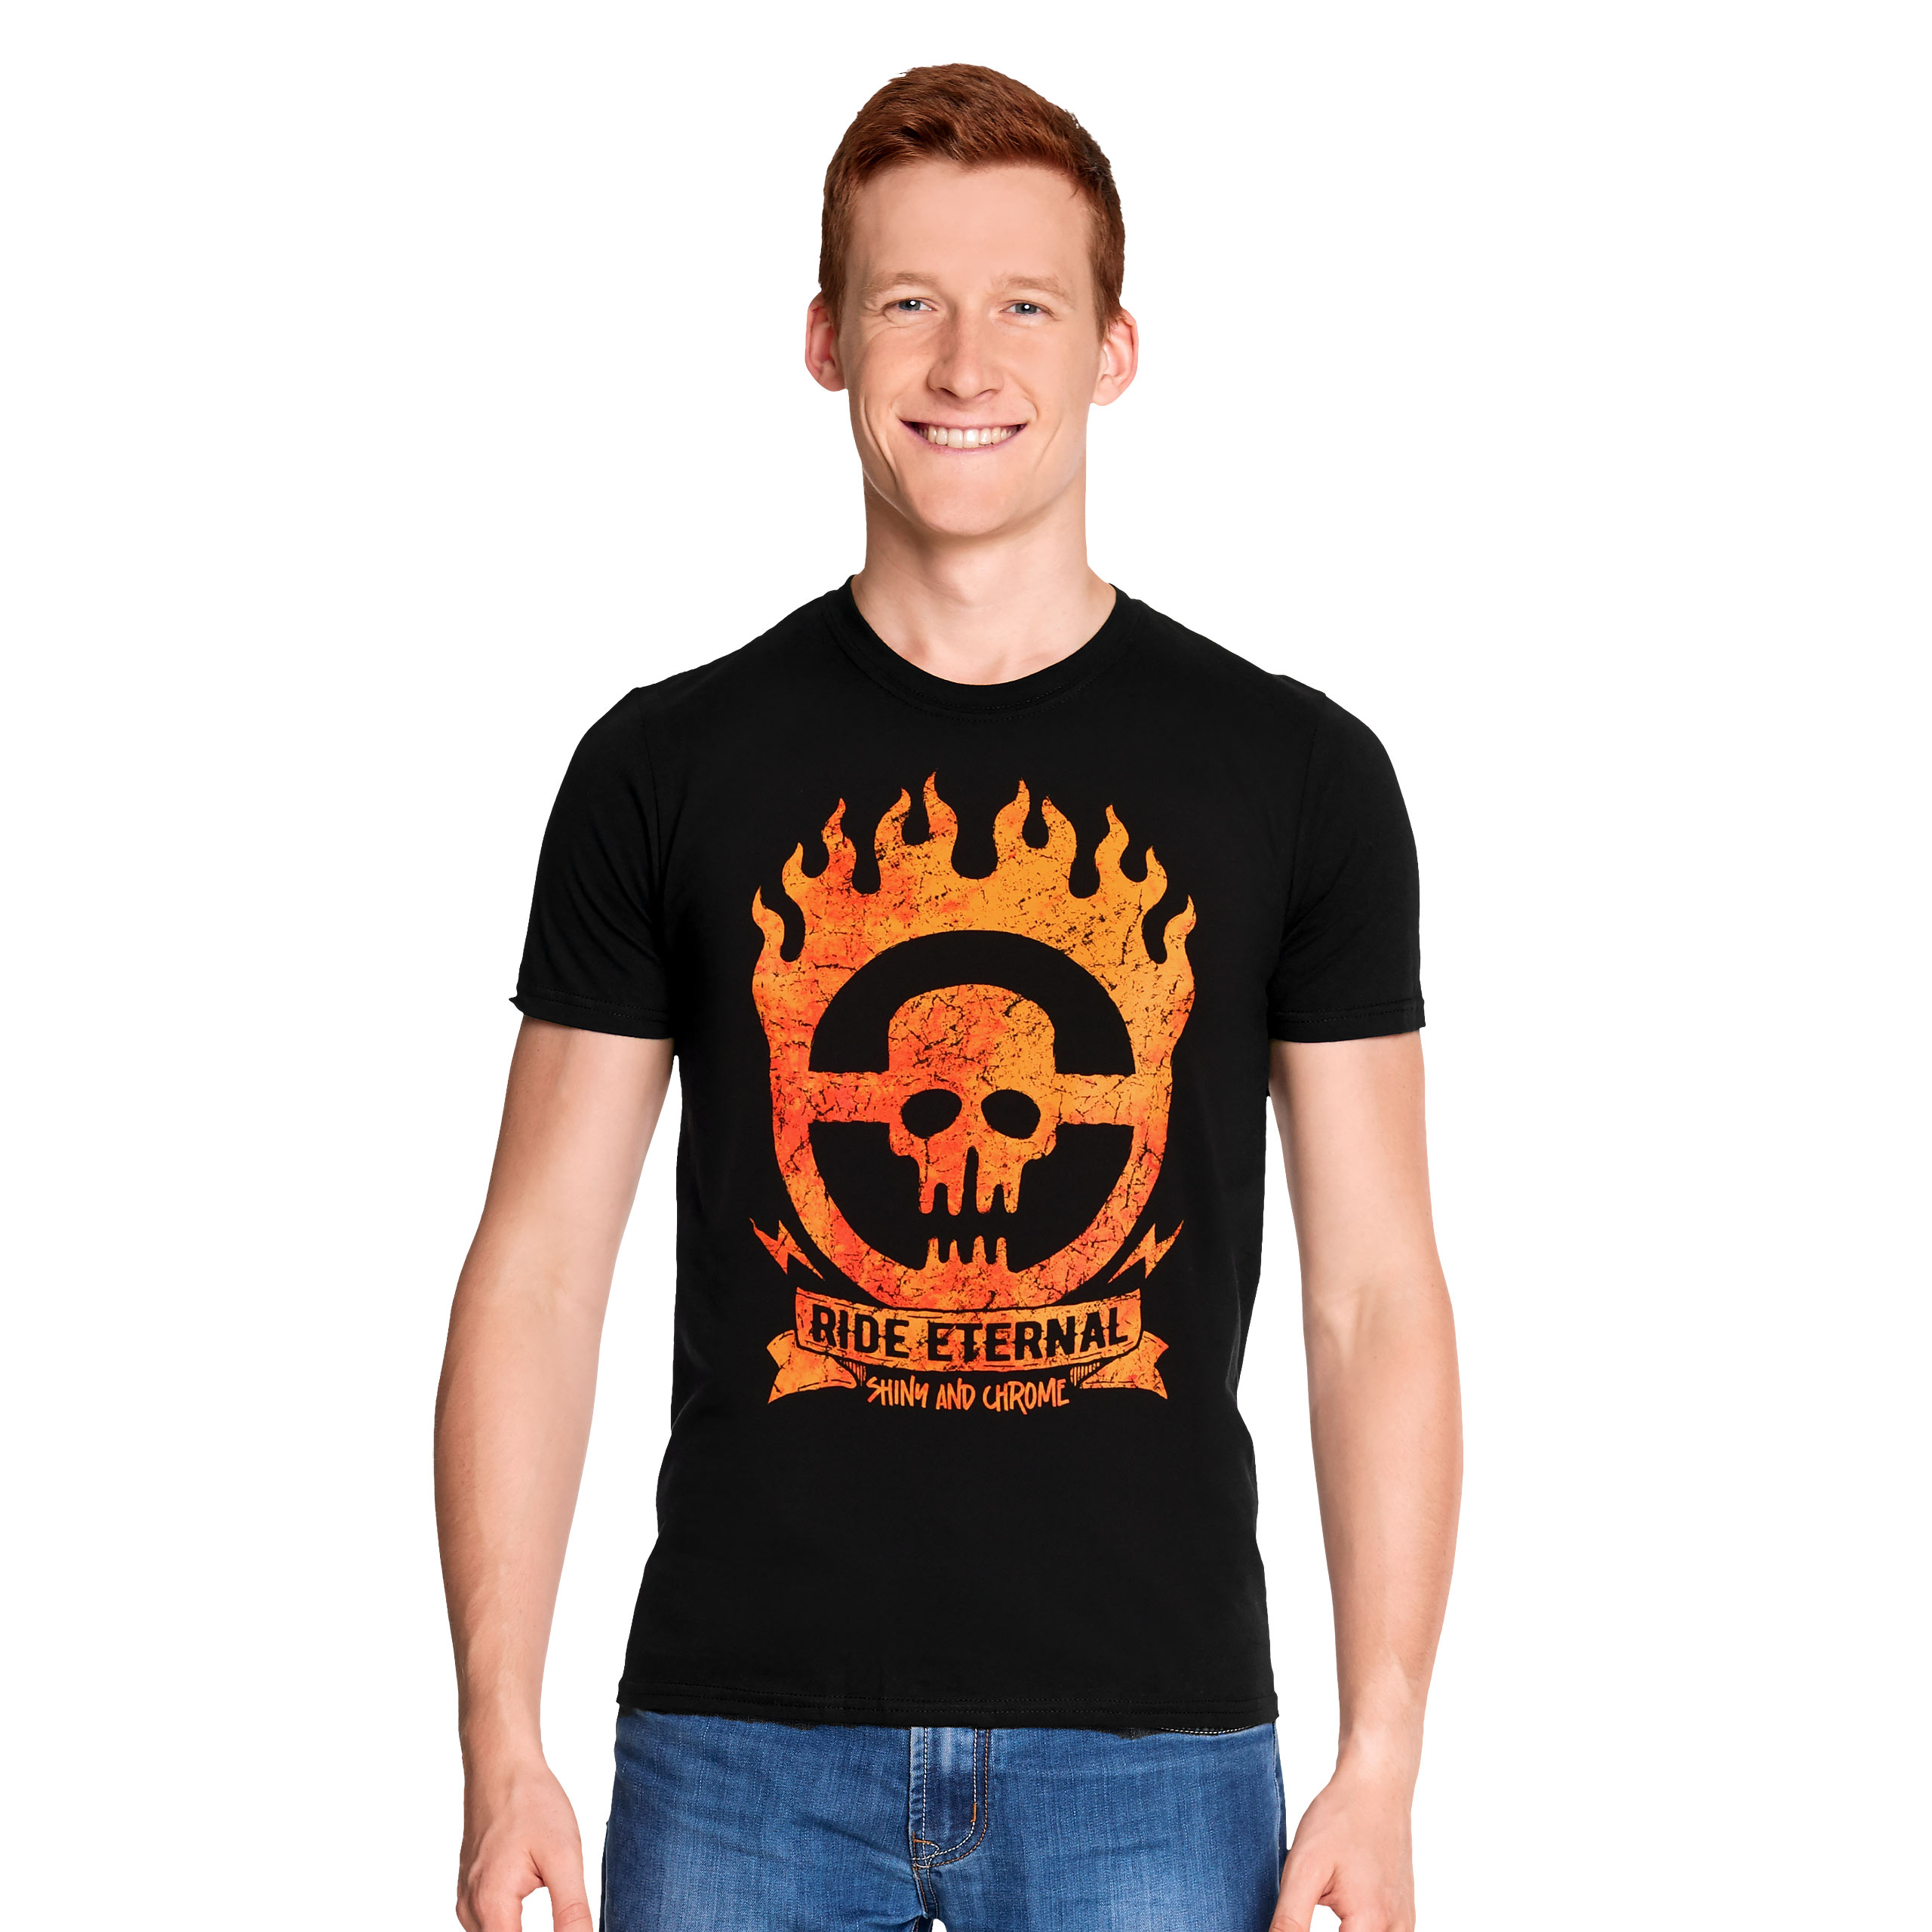 War Boys T-Shirt for Mad Max Fans black